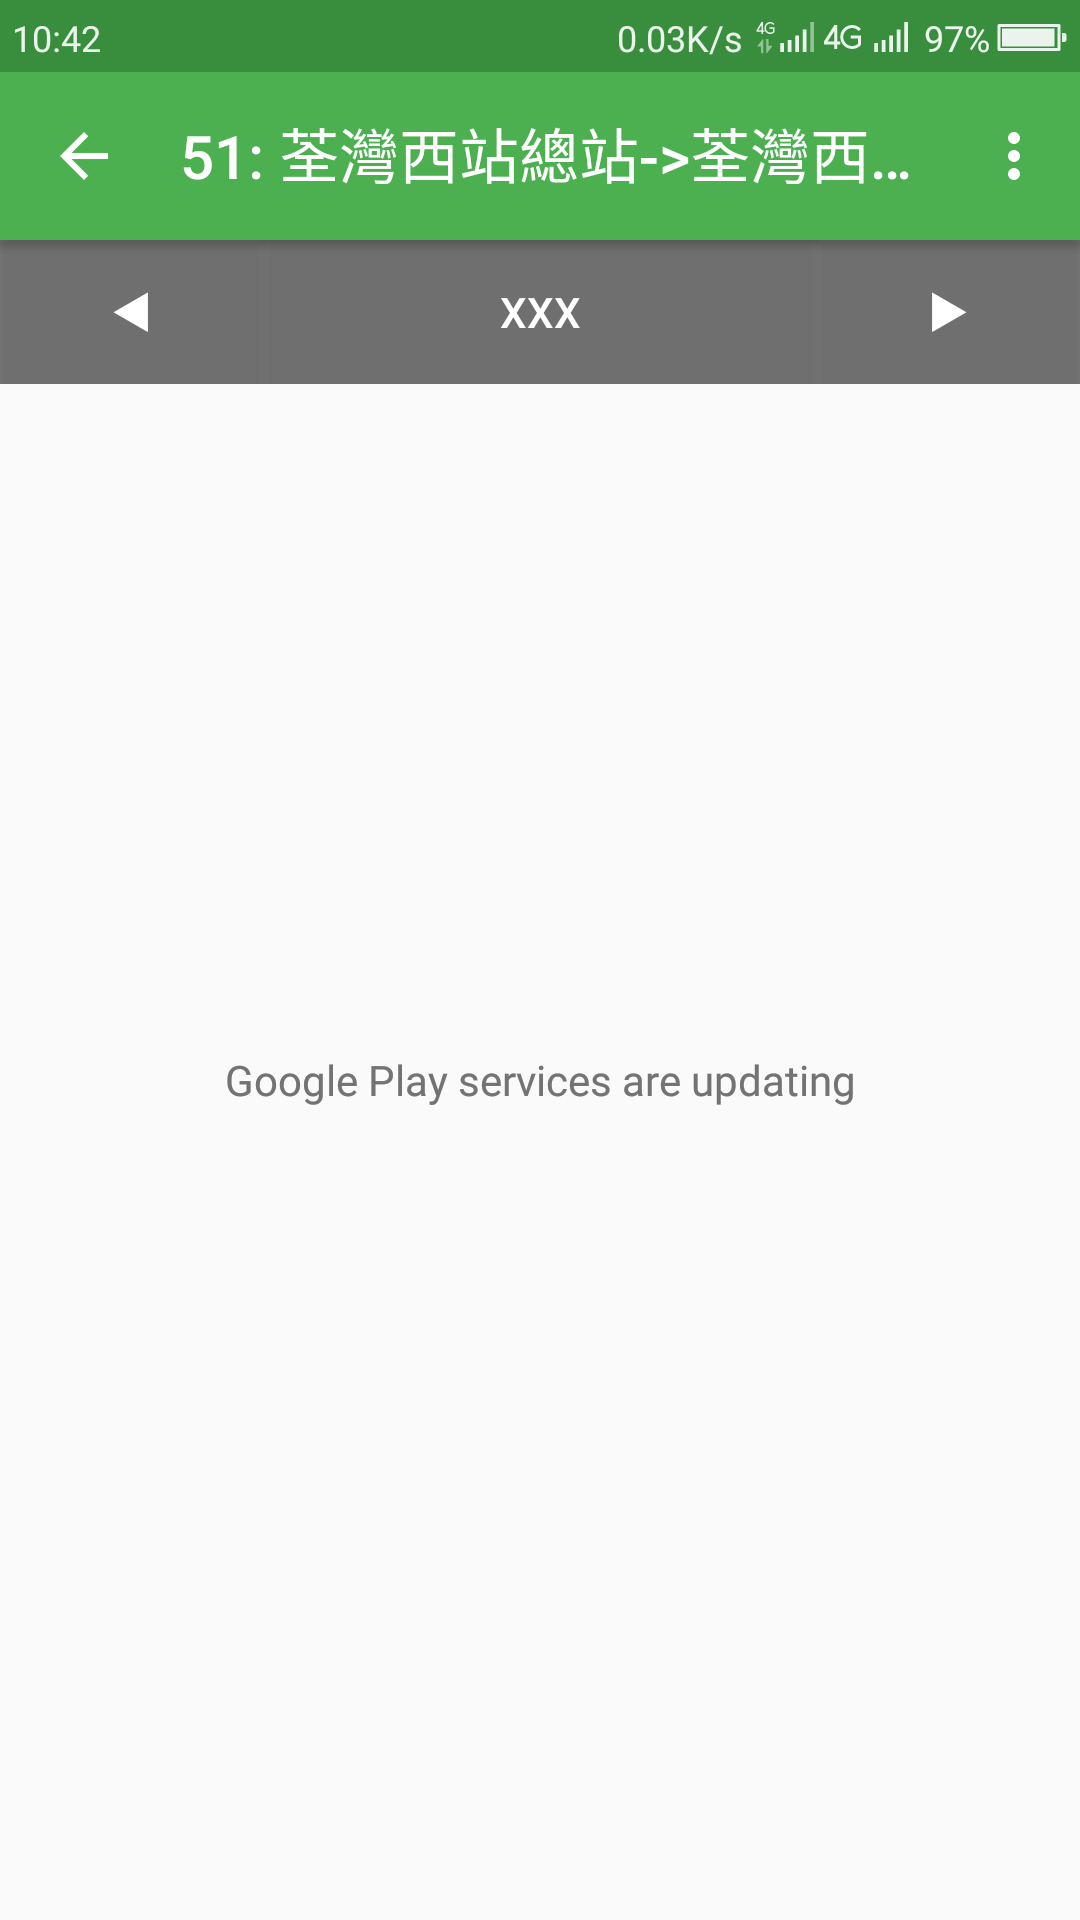 Google Play Service are updating